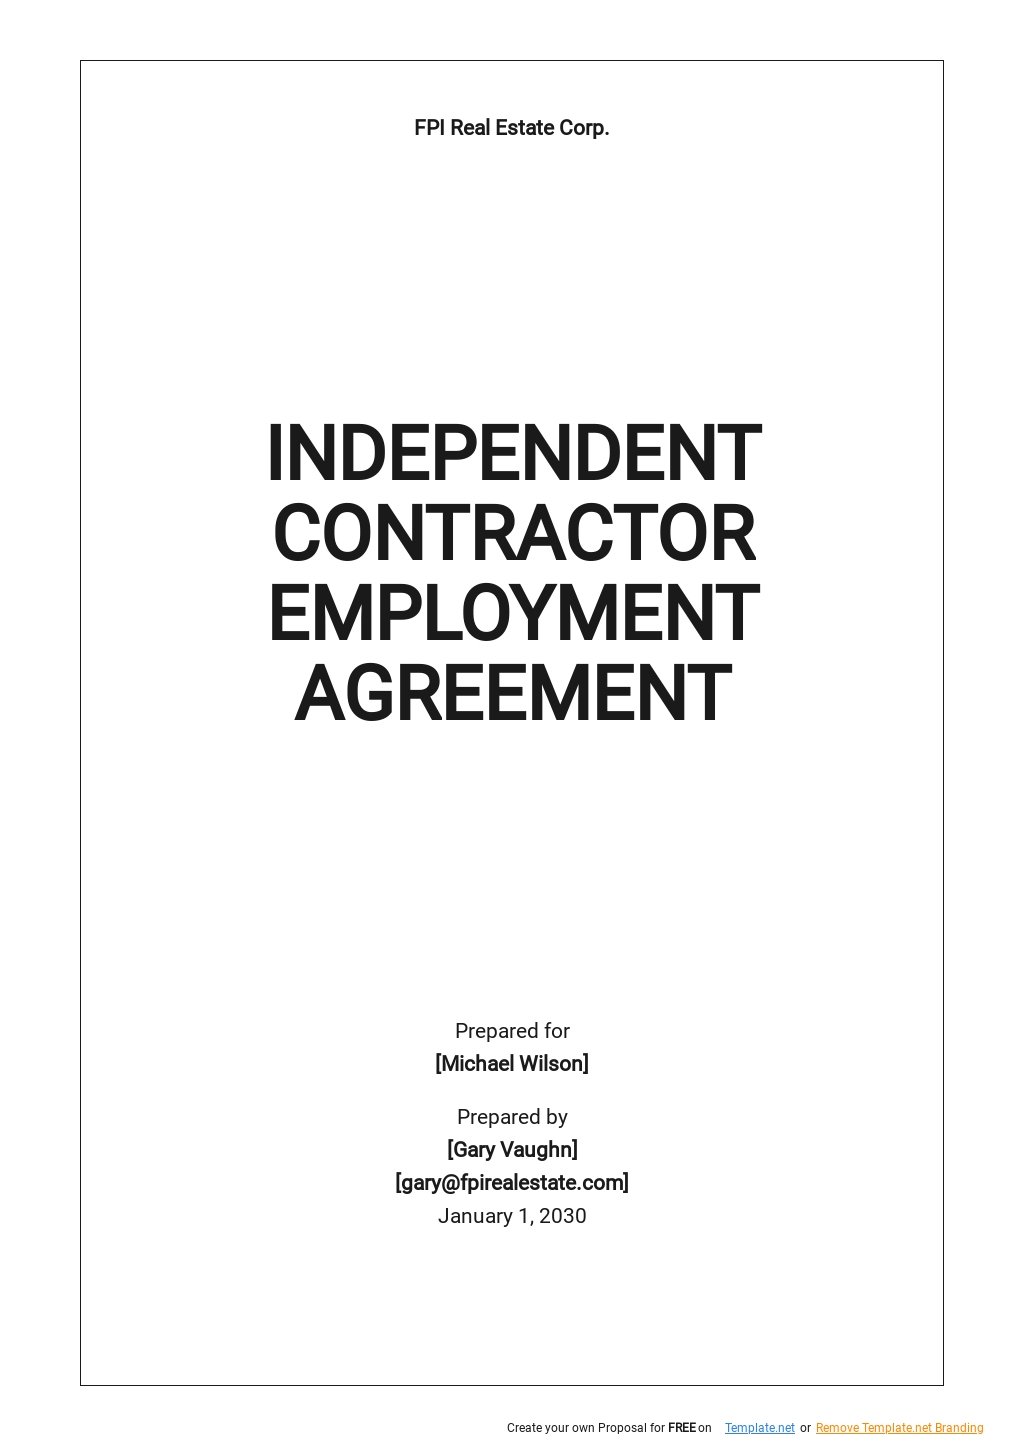 Independent Contractor Employment Agreement Template